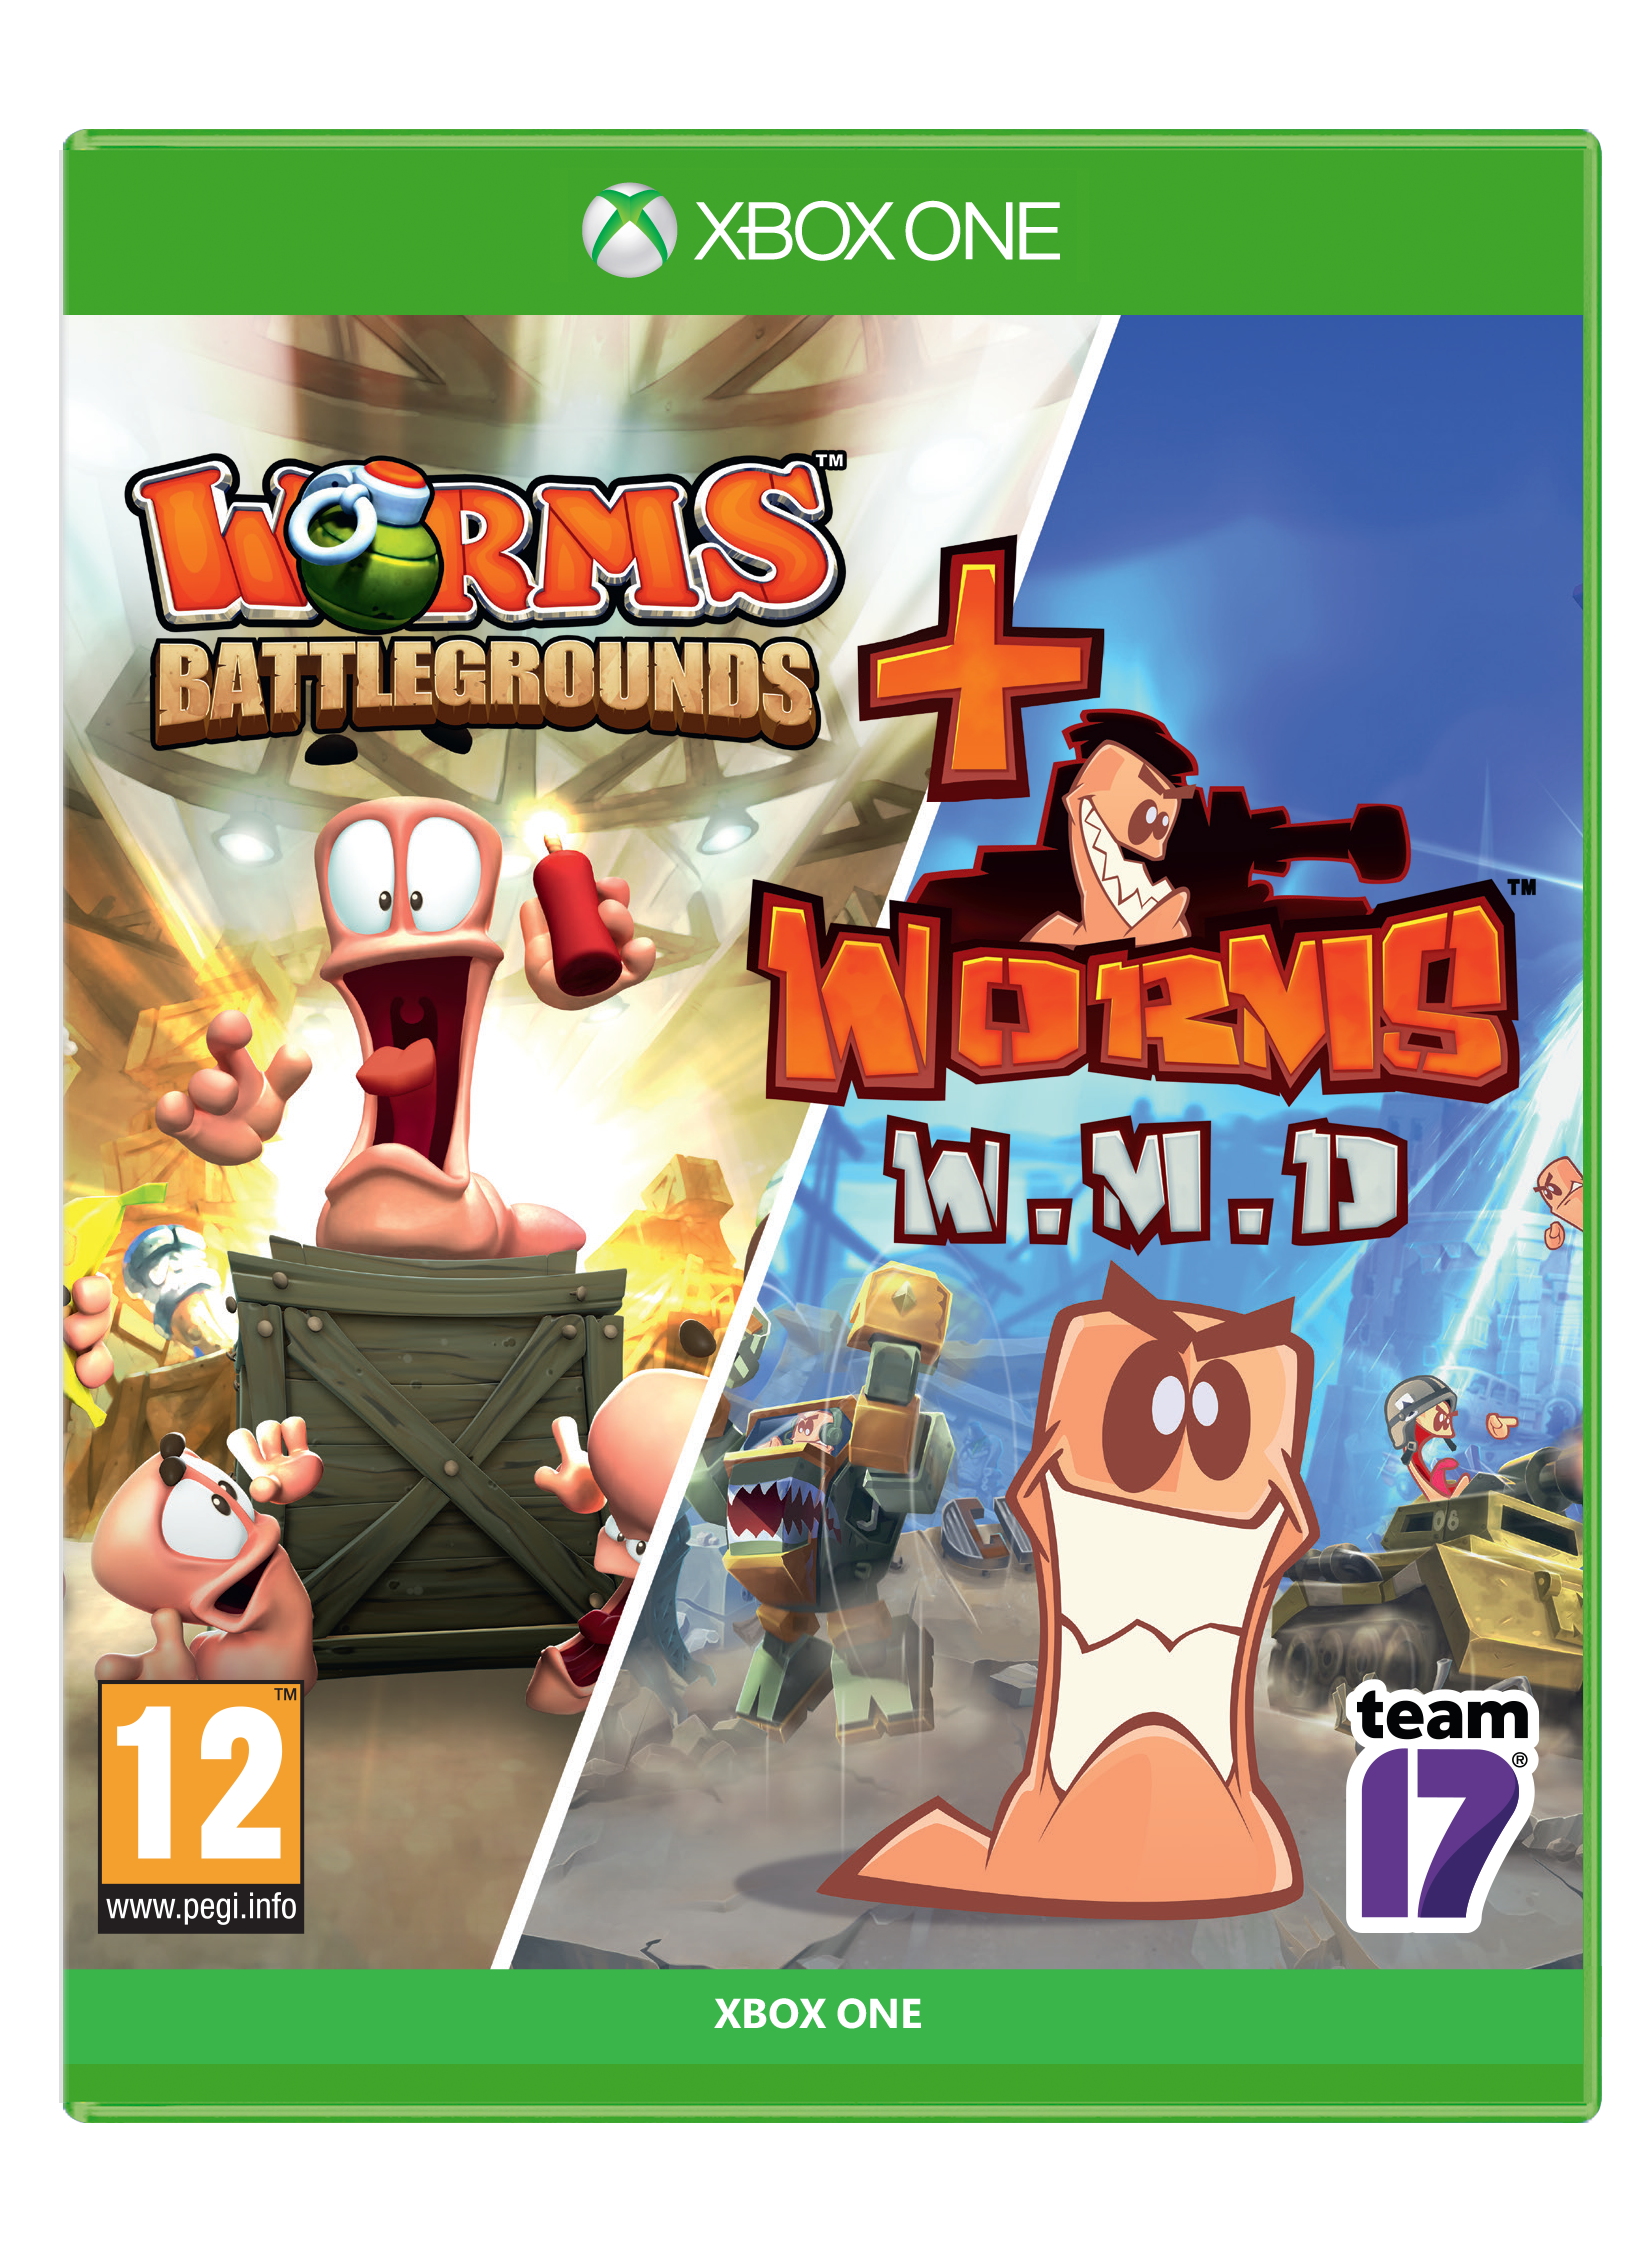 Worms ps4. Worms WMD игра. Worms WMD ps4. Worms w.m.d ps4. Worms Battlegrounds (ps4).